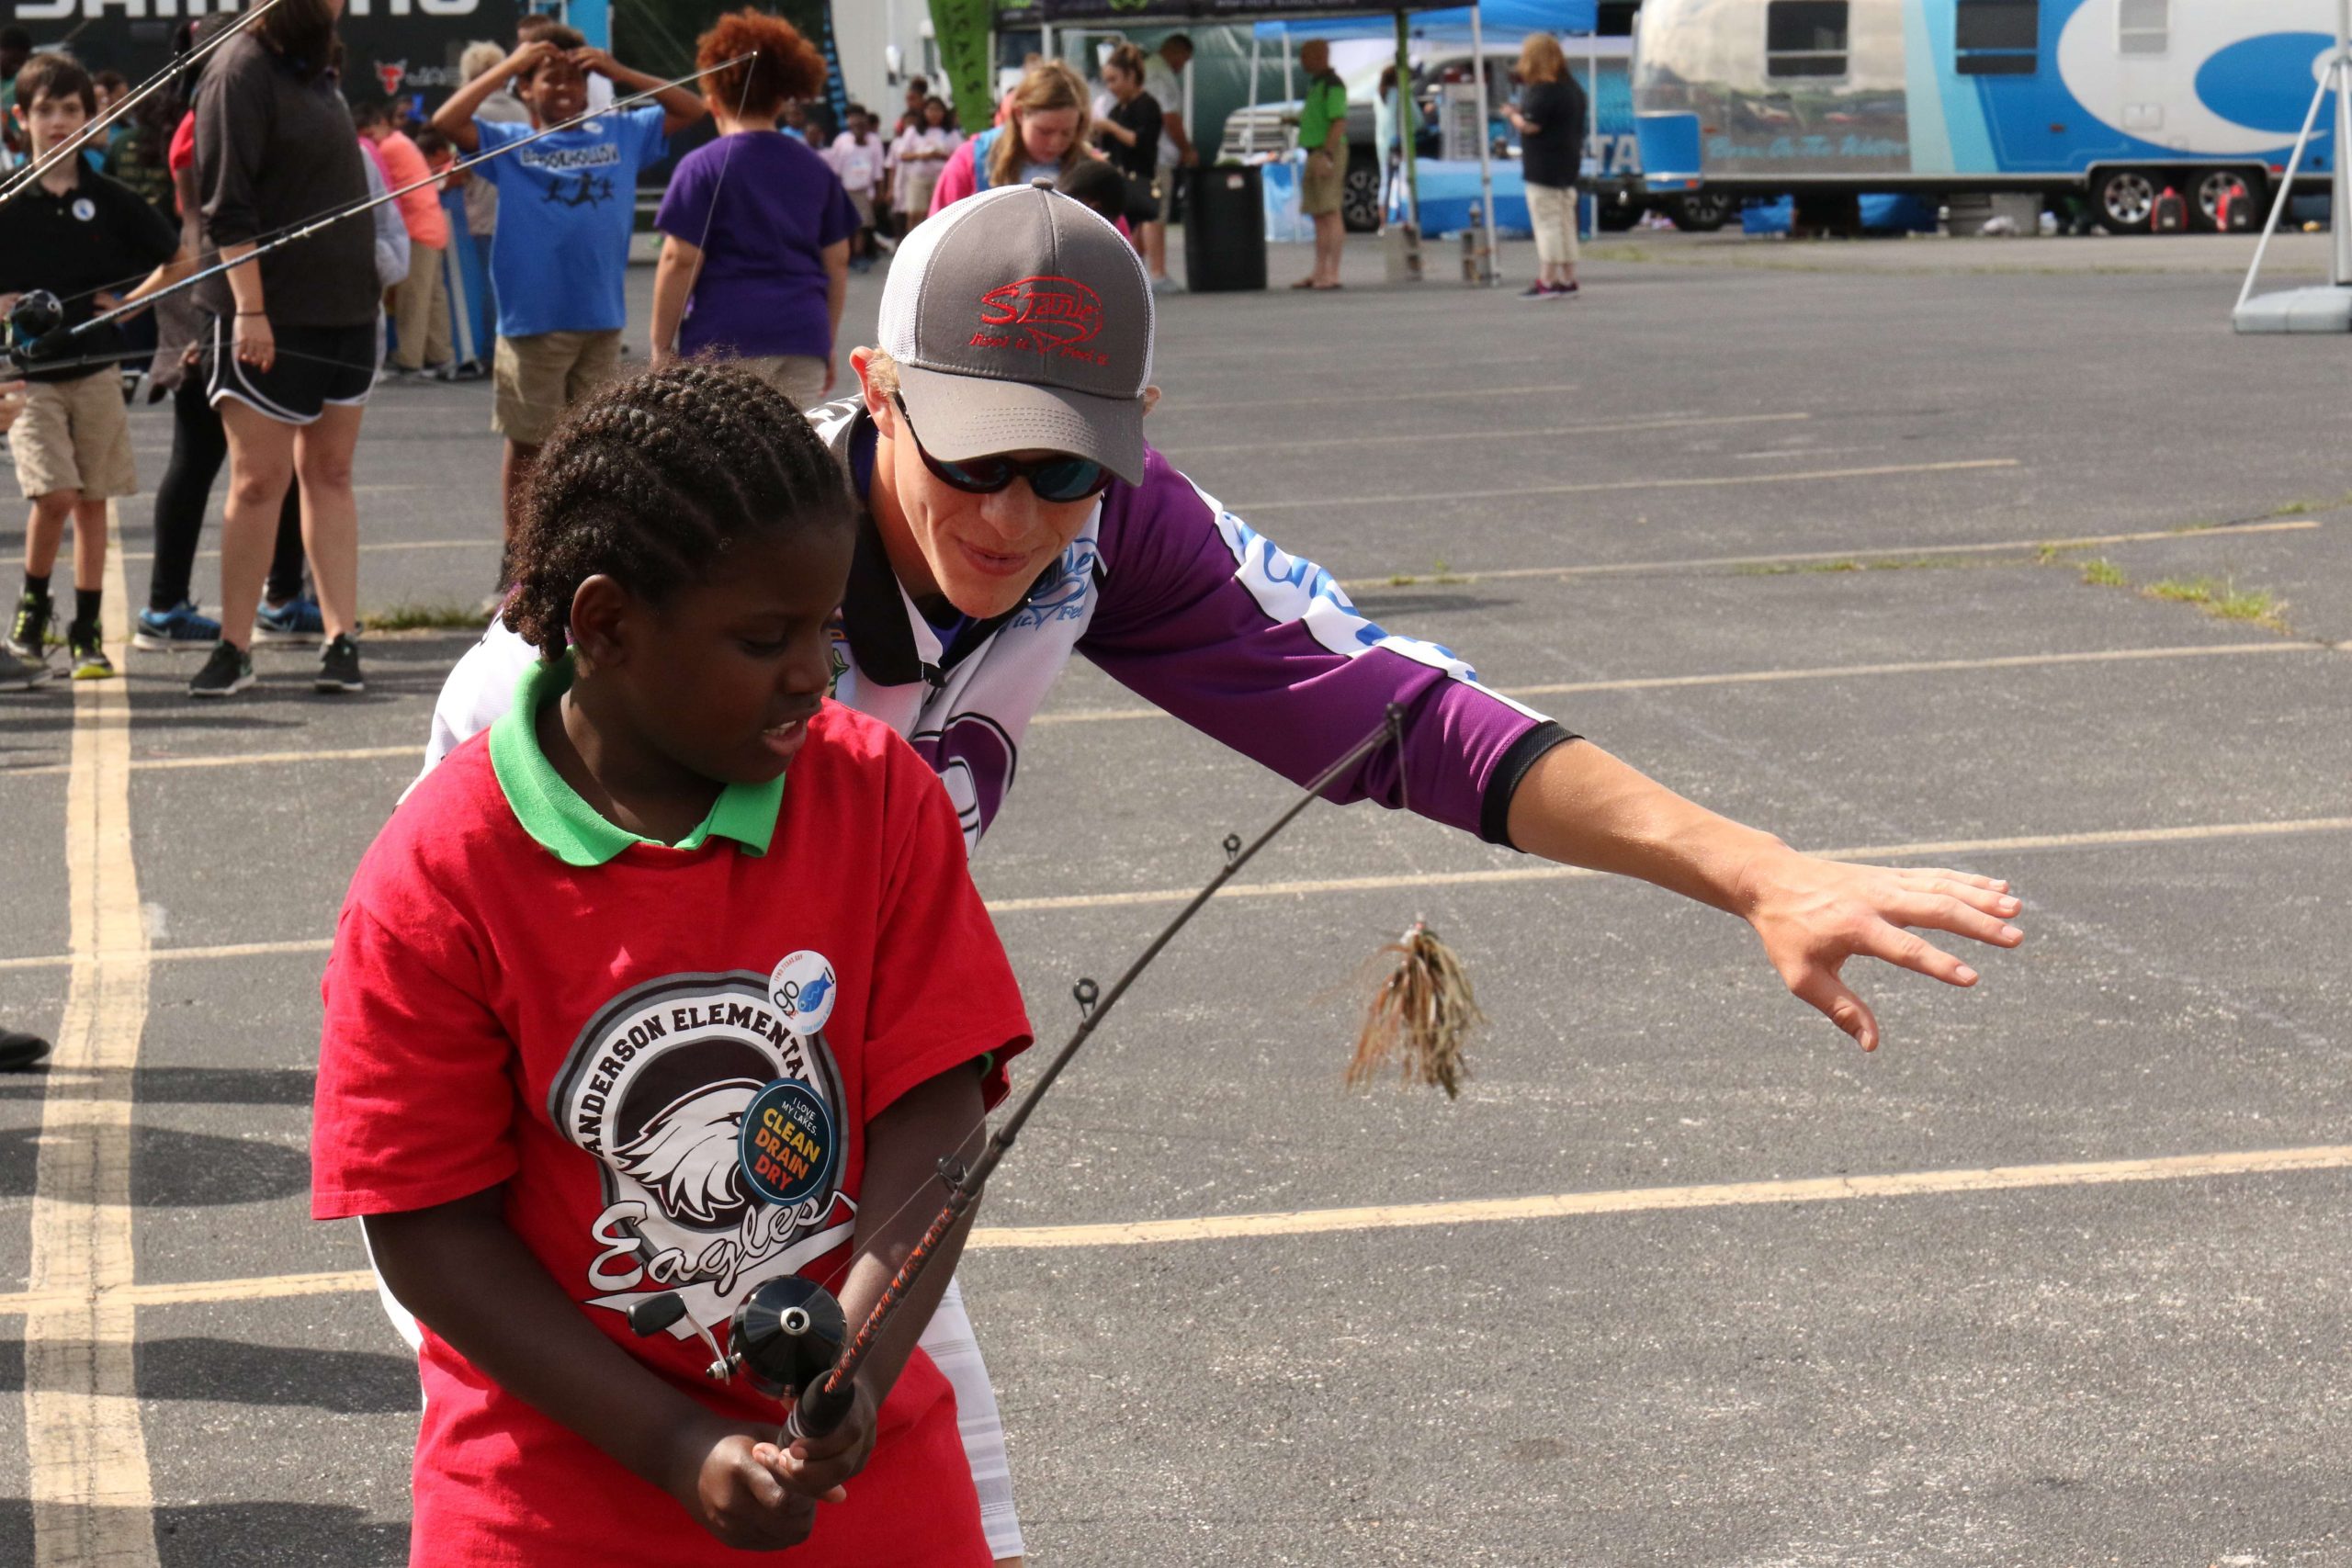 Students from five elementary schools in the east Texas area traveled up to 100 miles to learn about fishing and conservation.